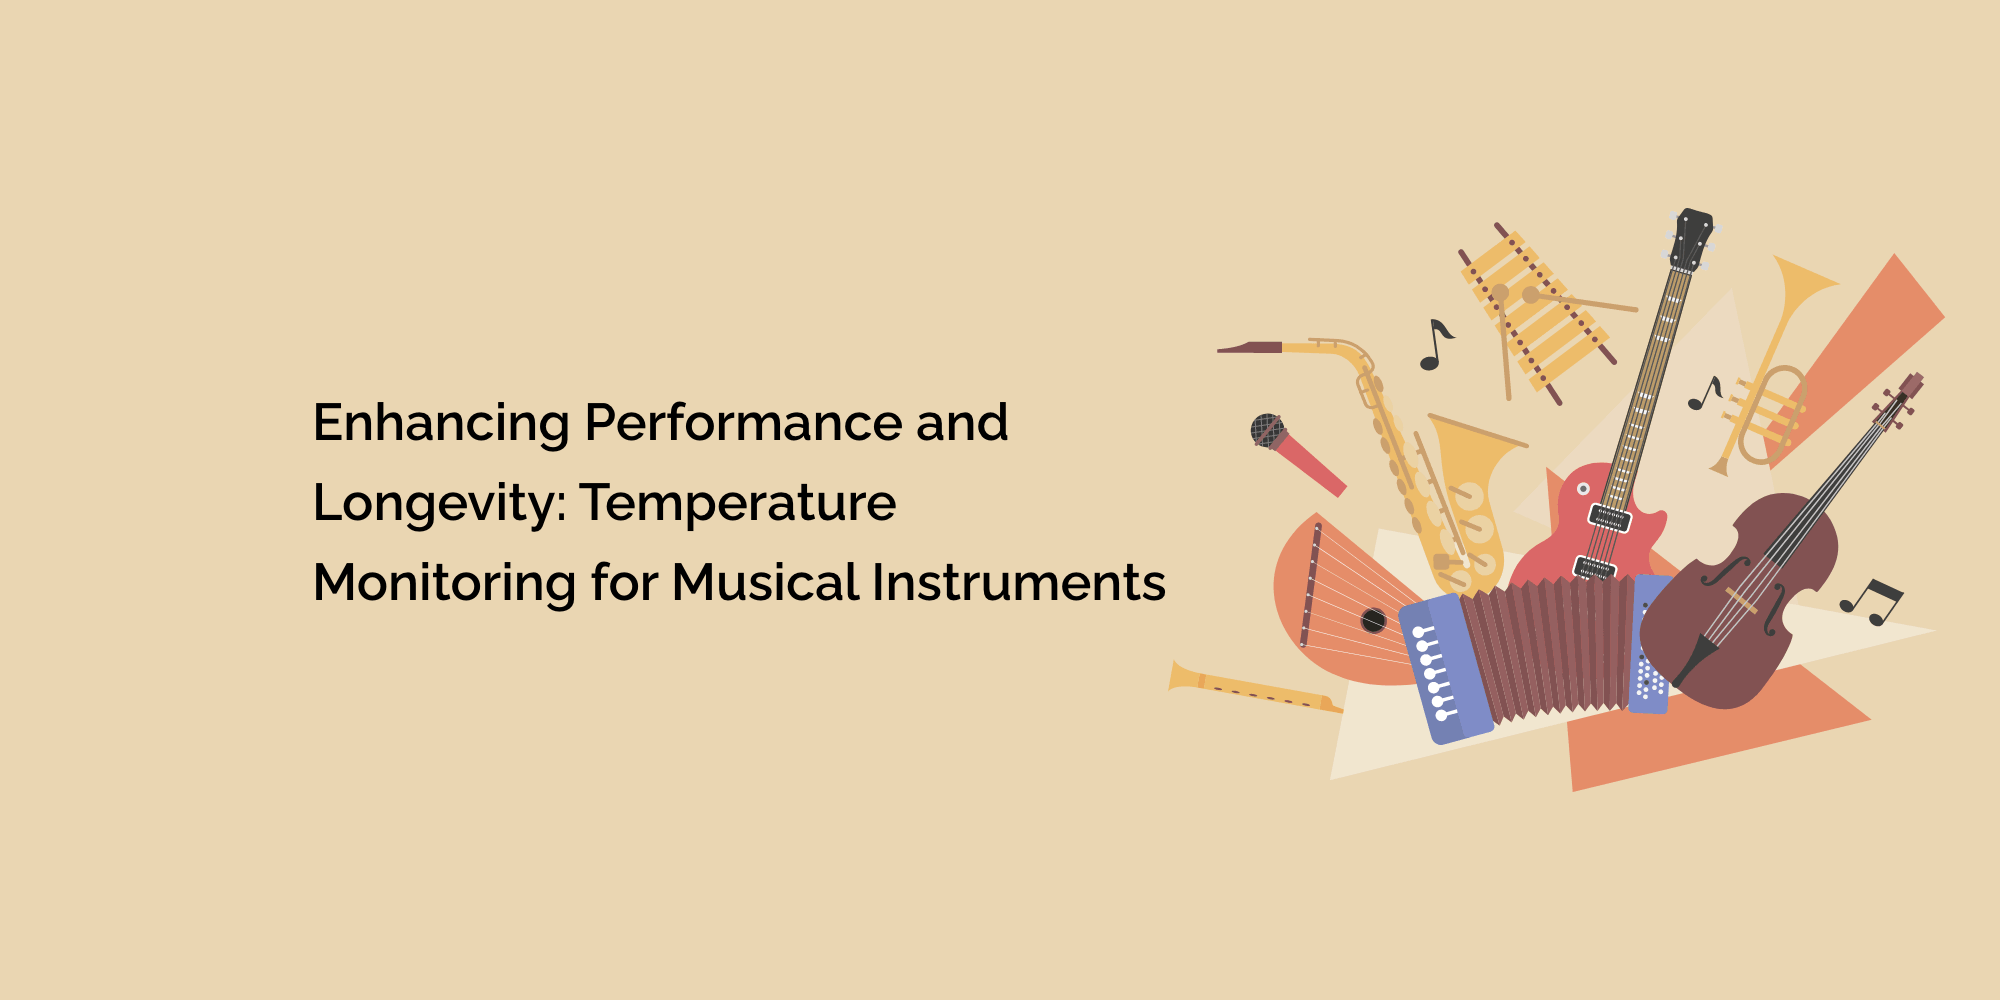 Enhancing Performance and Longevity: Temperature Monitoring for Musical Instruments